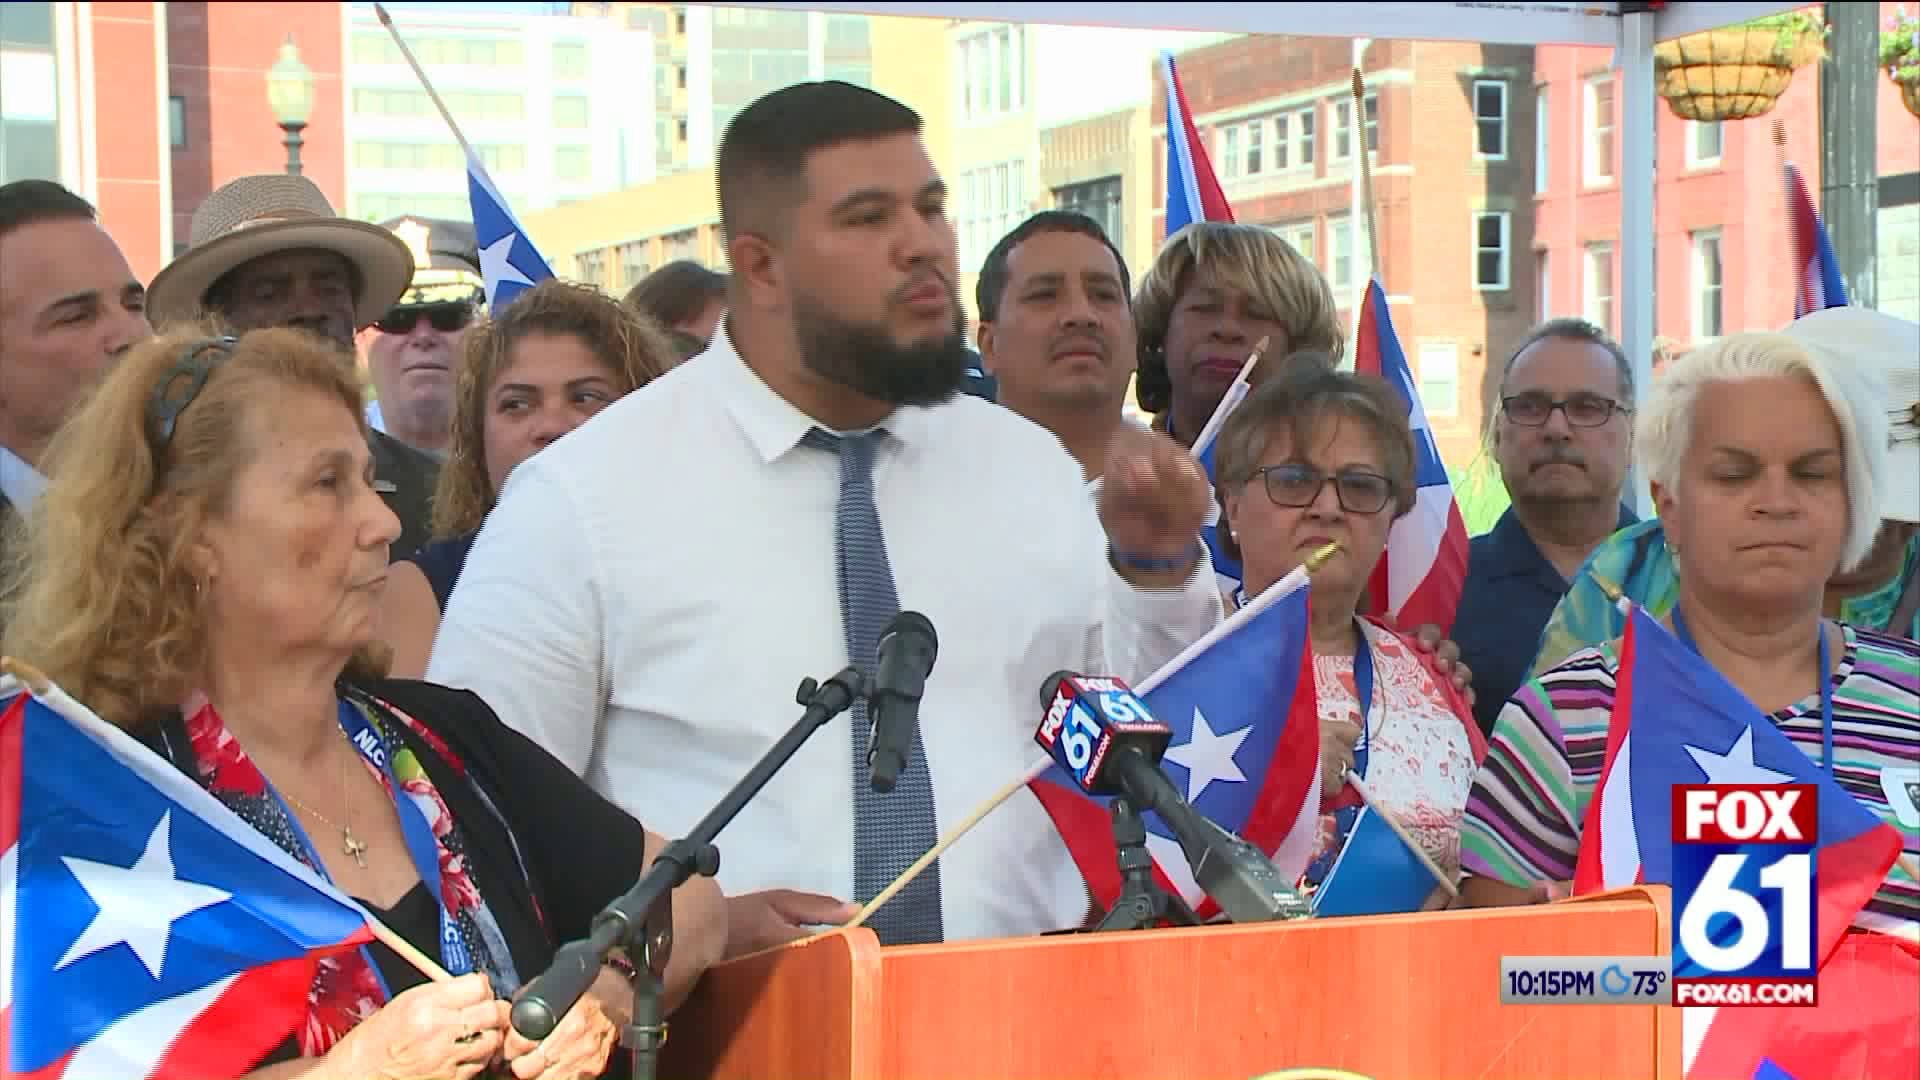 Pride and unity highlight emotions during rally for Puerto Rico